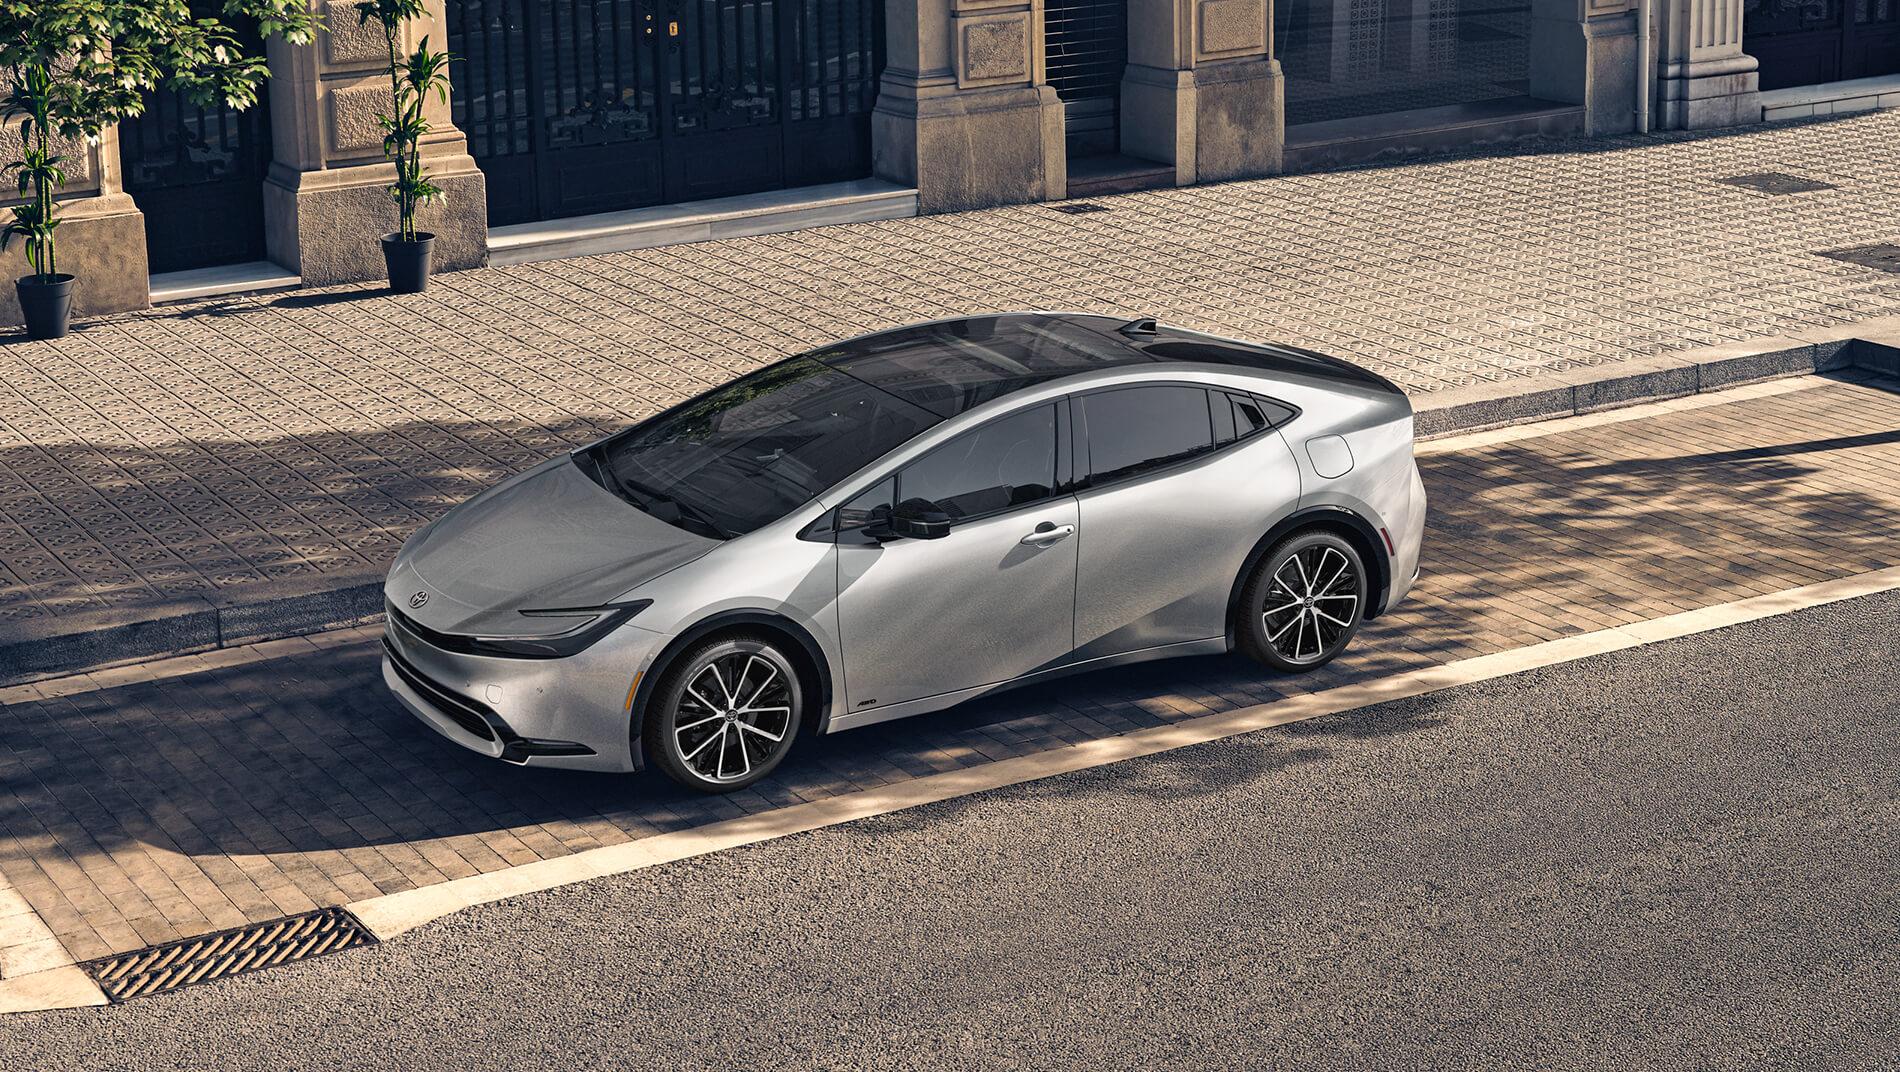 2023 Toyota Prius parked on a city street